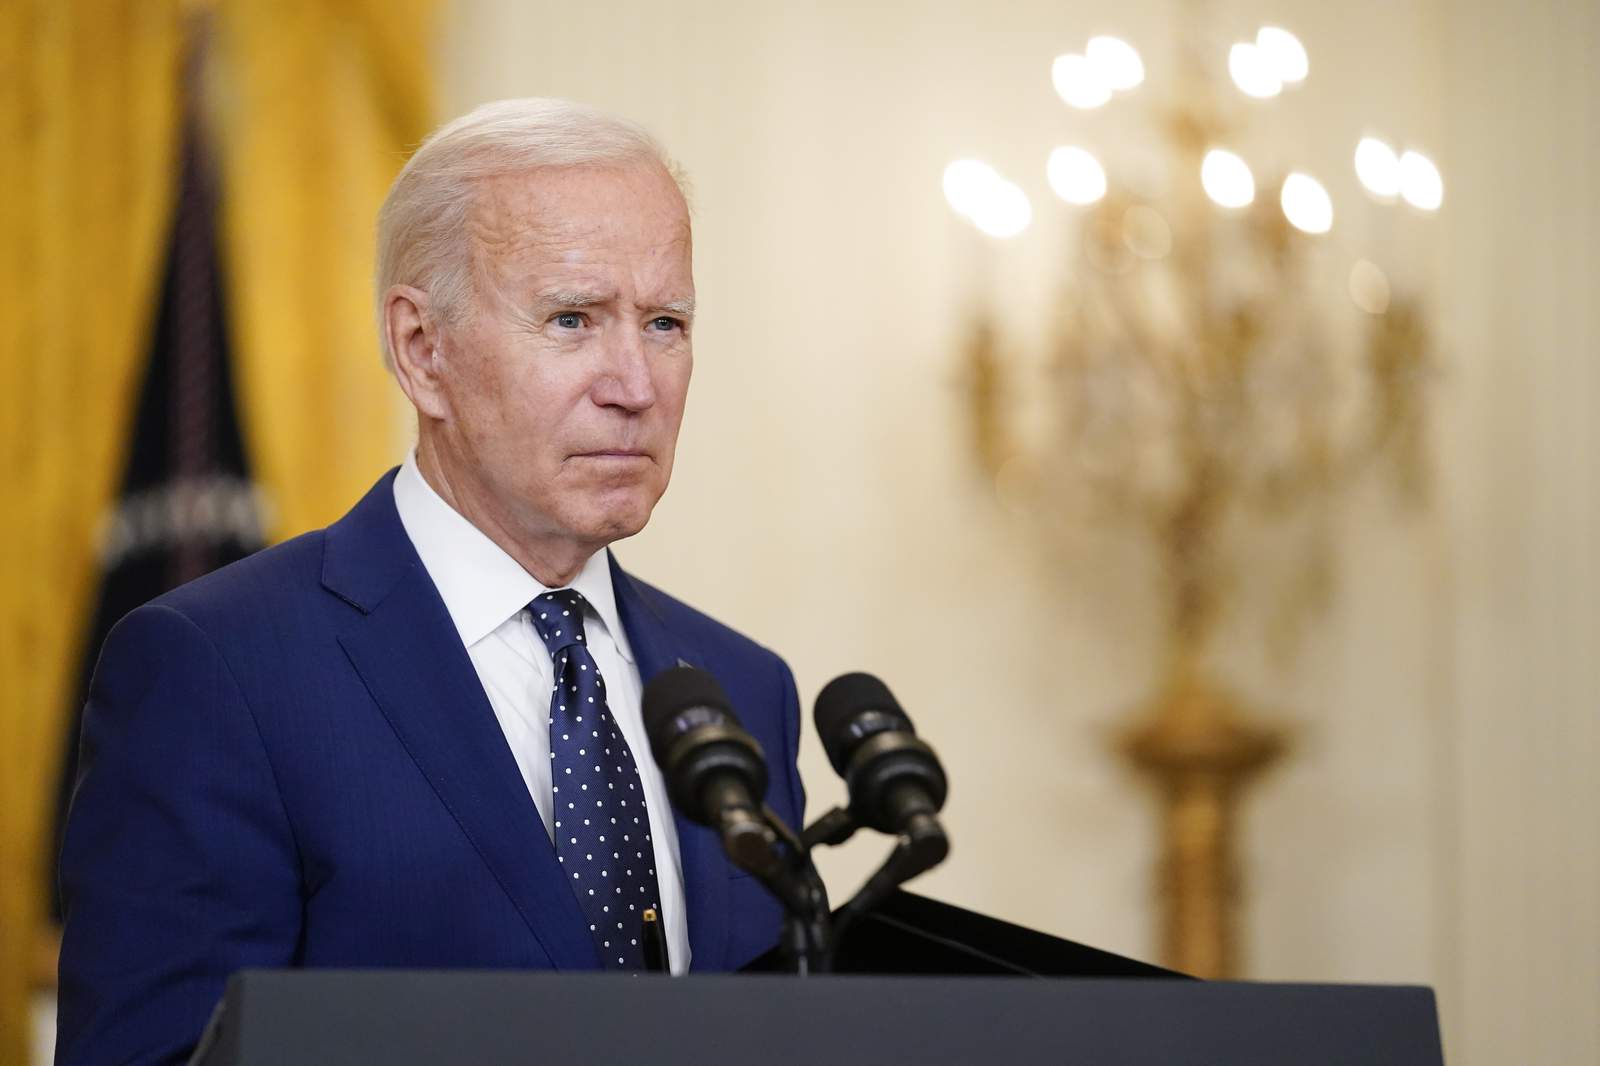 On foreign policy decisions, Biden faces drag of pragmatism